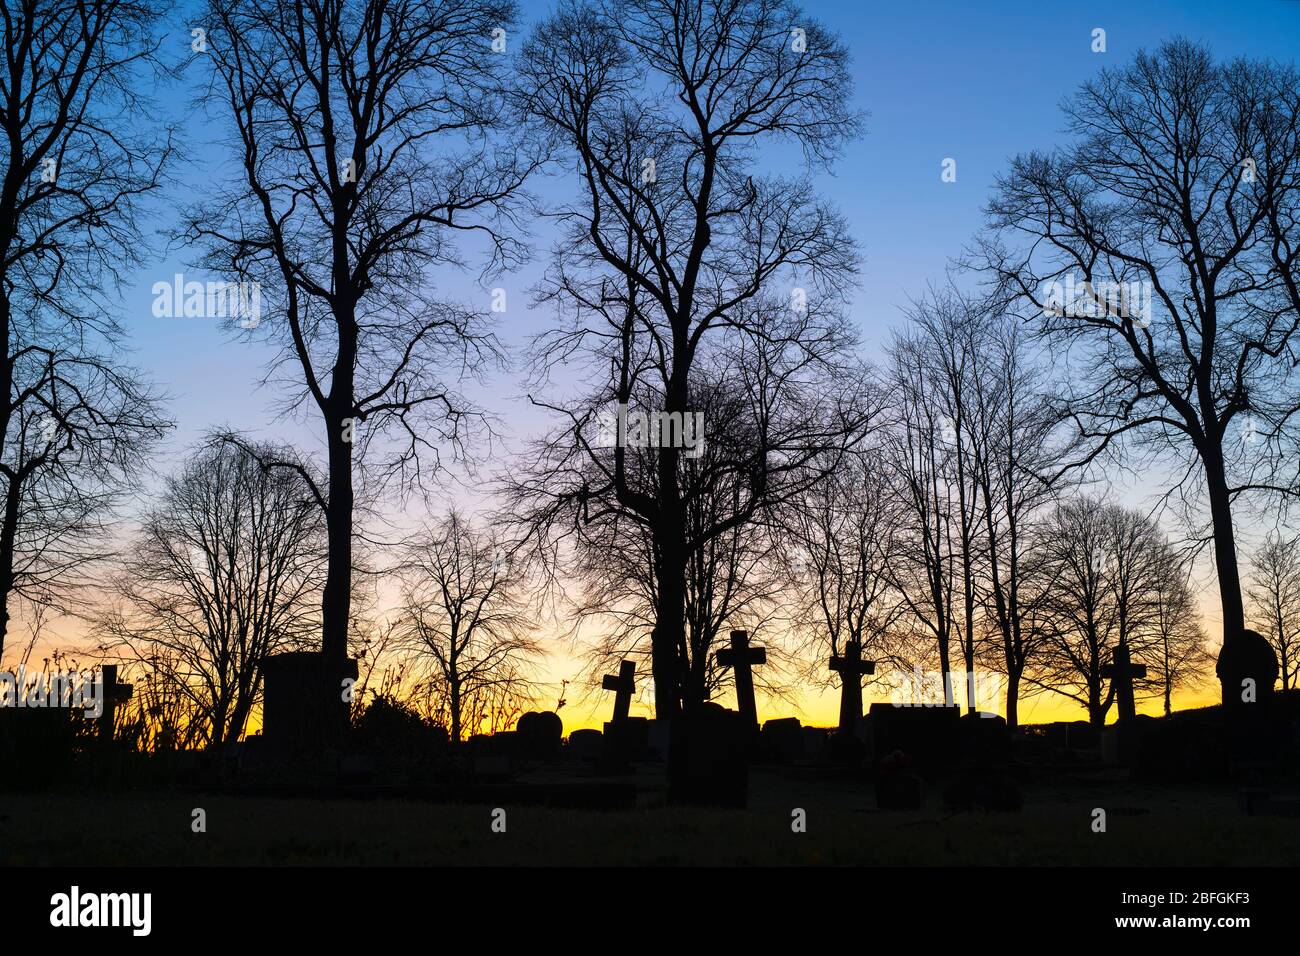 Silhouette of cross headstones and trees in a cemetery at dawn. Kings Sutton, Northamptonshire, England. Silhouette Stock Photo